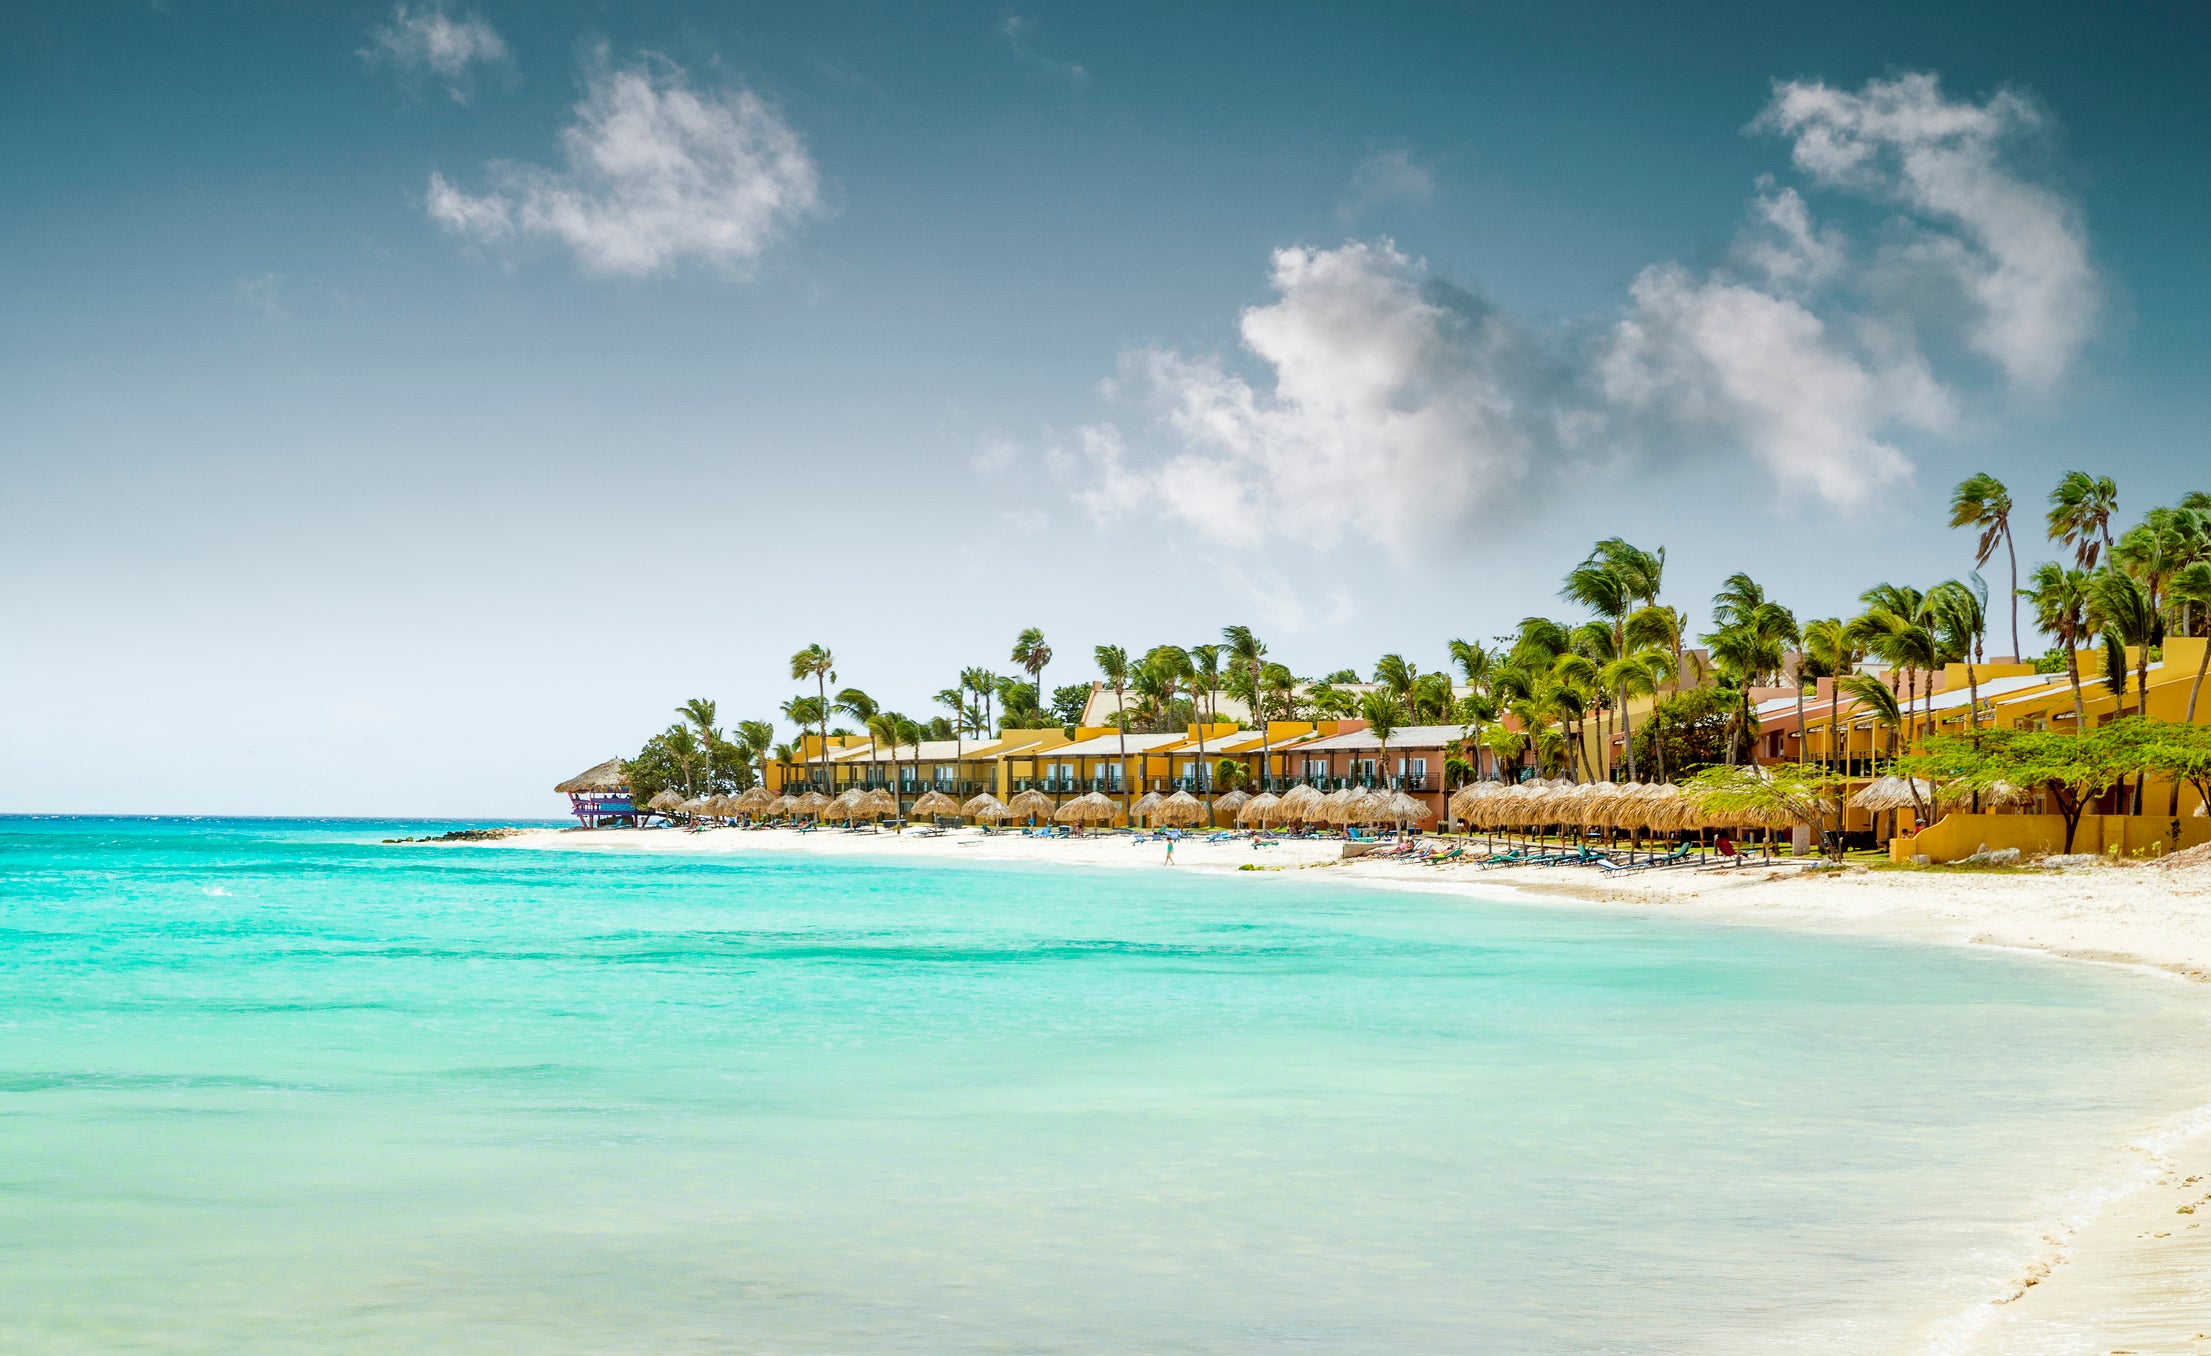 Eagle Beach in Aruba came in second place of the best beaches in the world, according to Tripadvisor